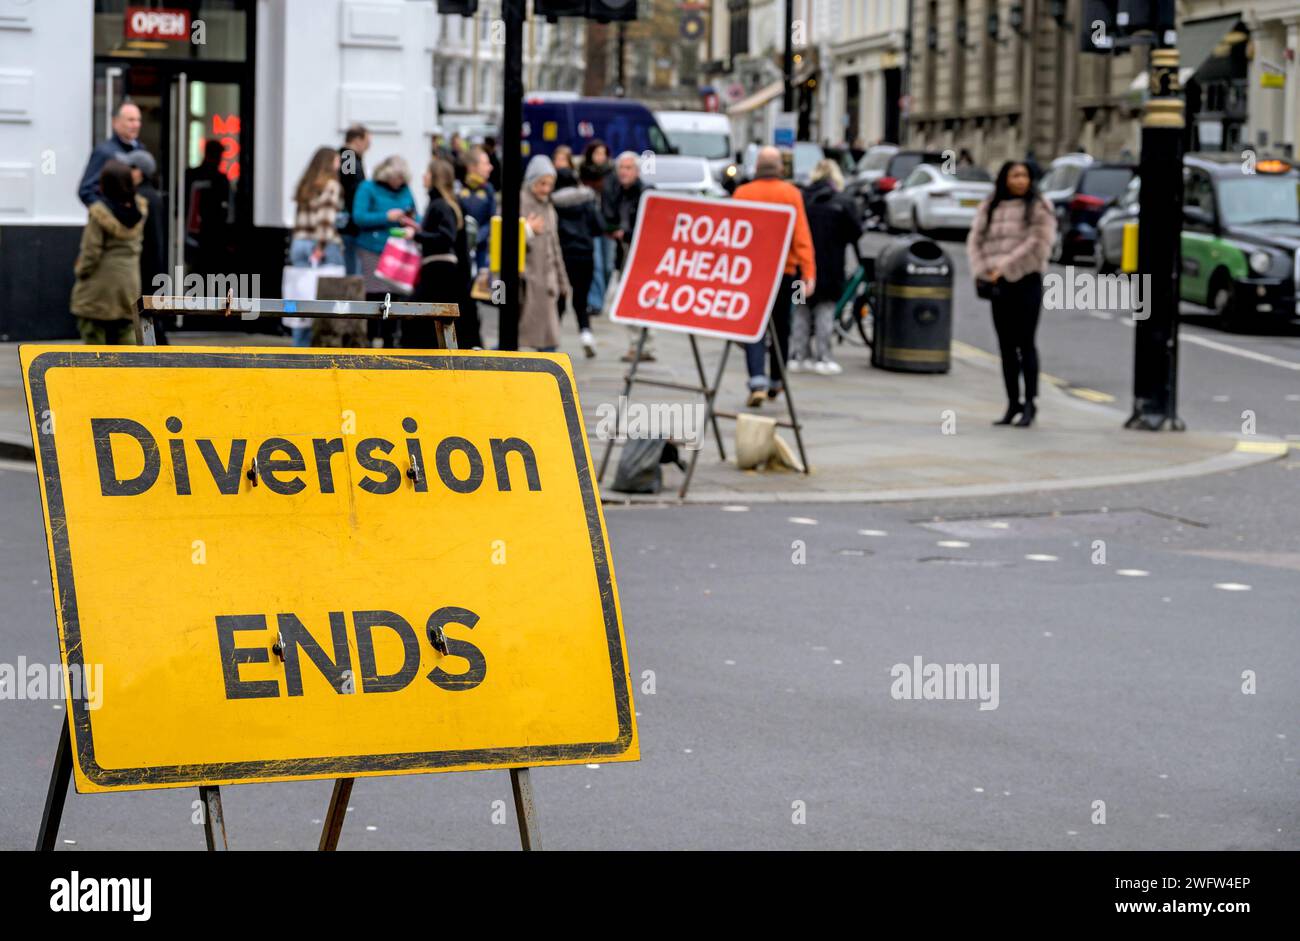 London, UK. 'Diversion End' and 'Road Ahead Closed' signs in Covent Garden Stock Photo